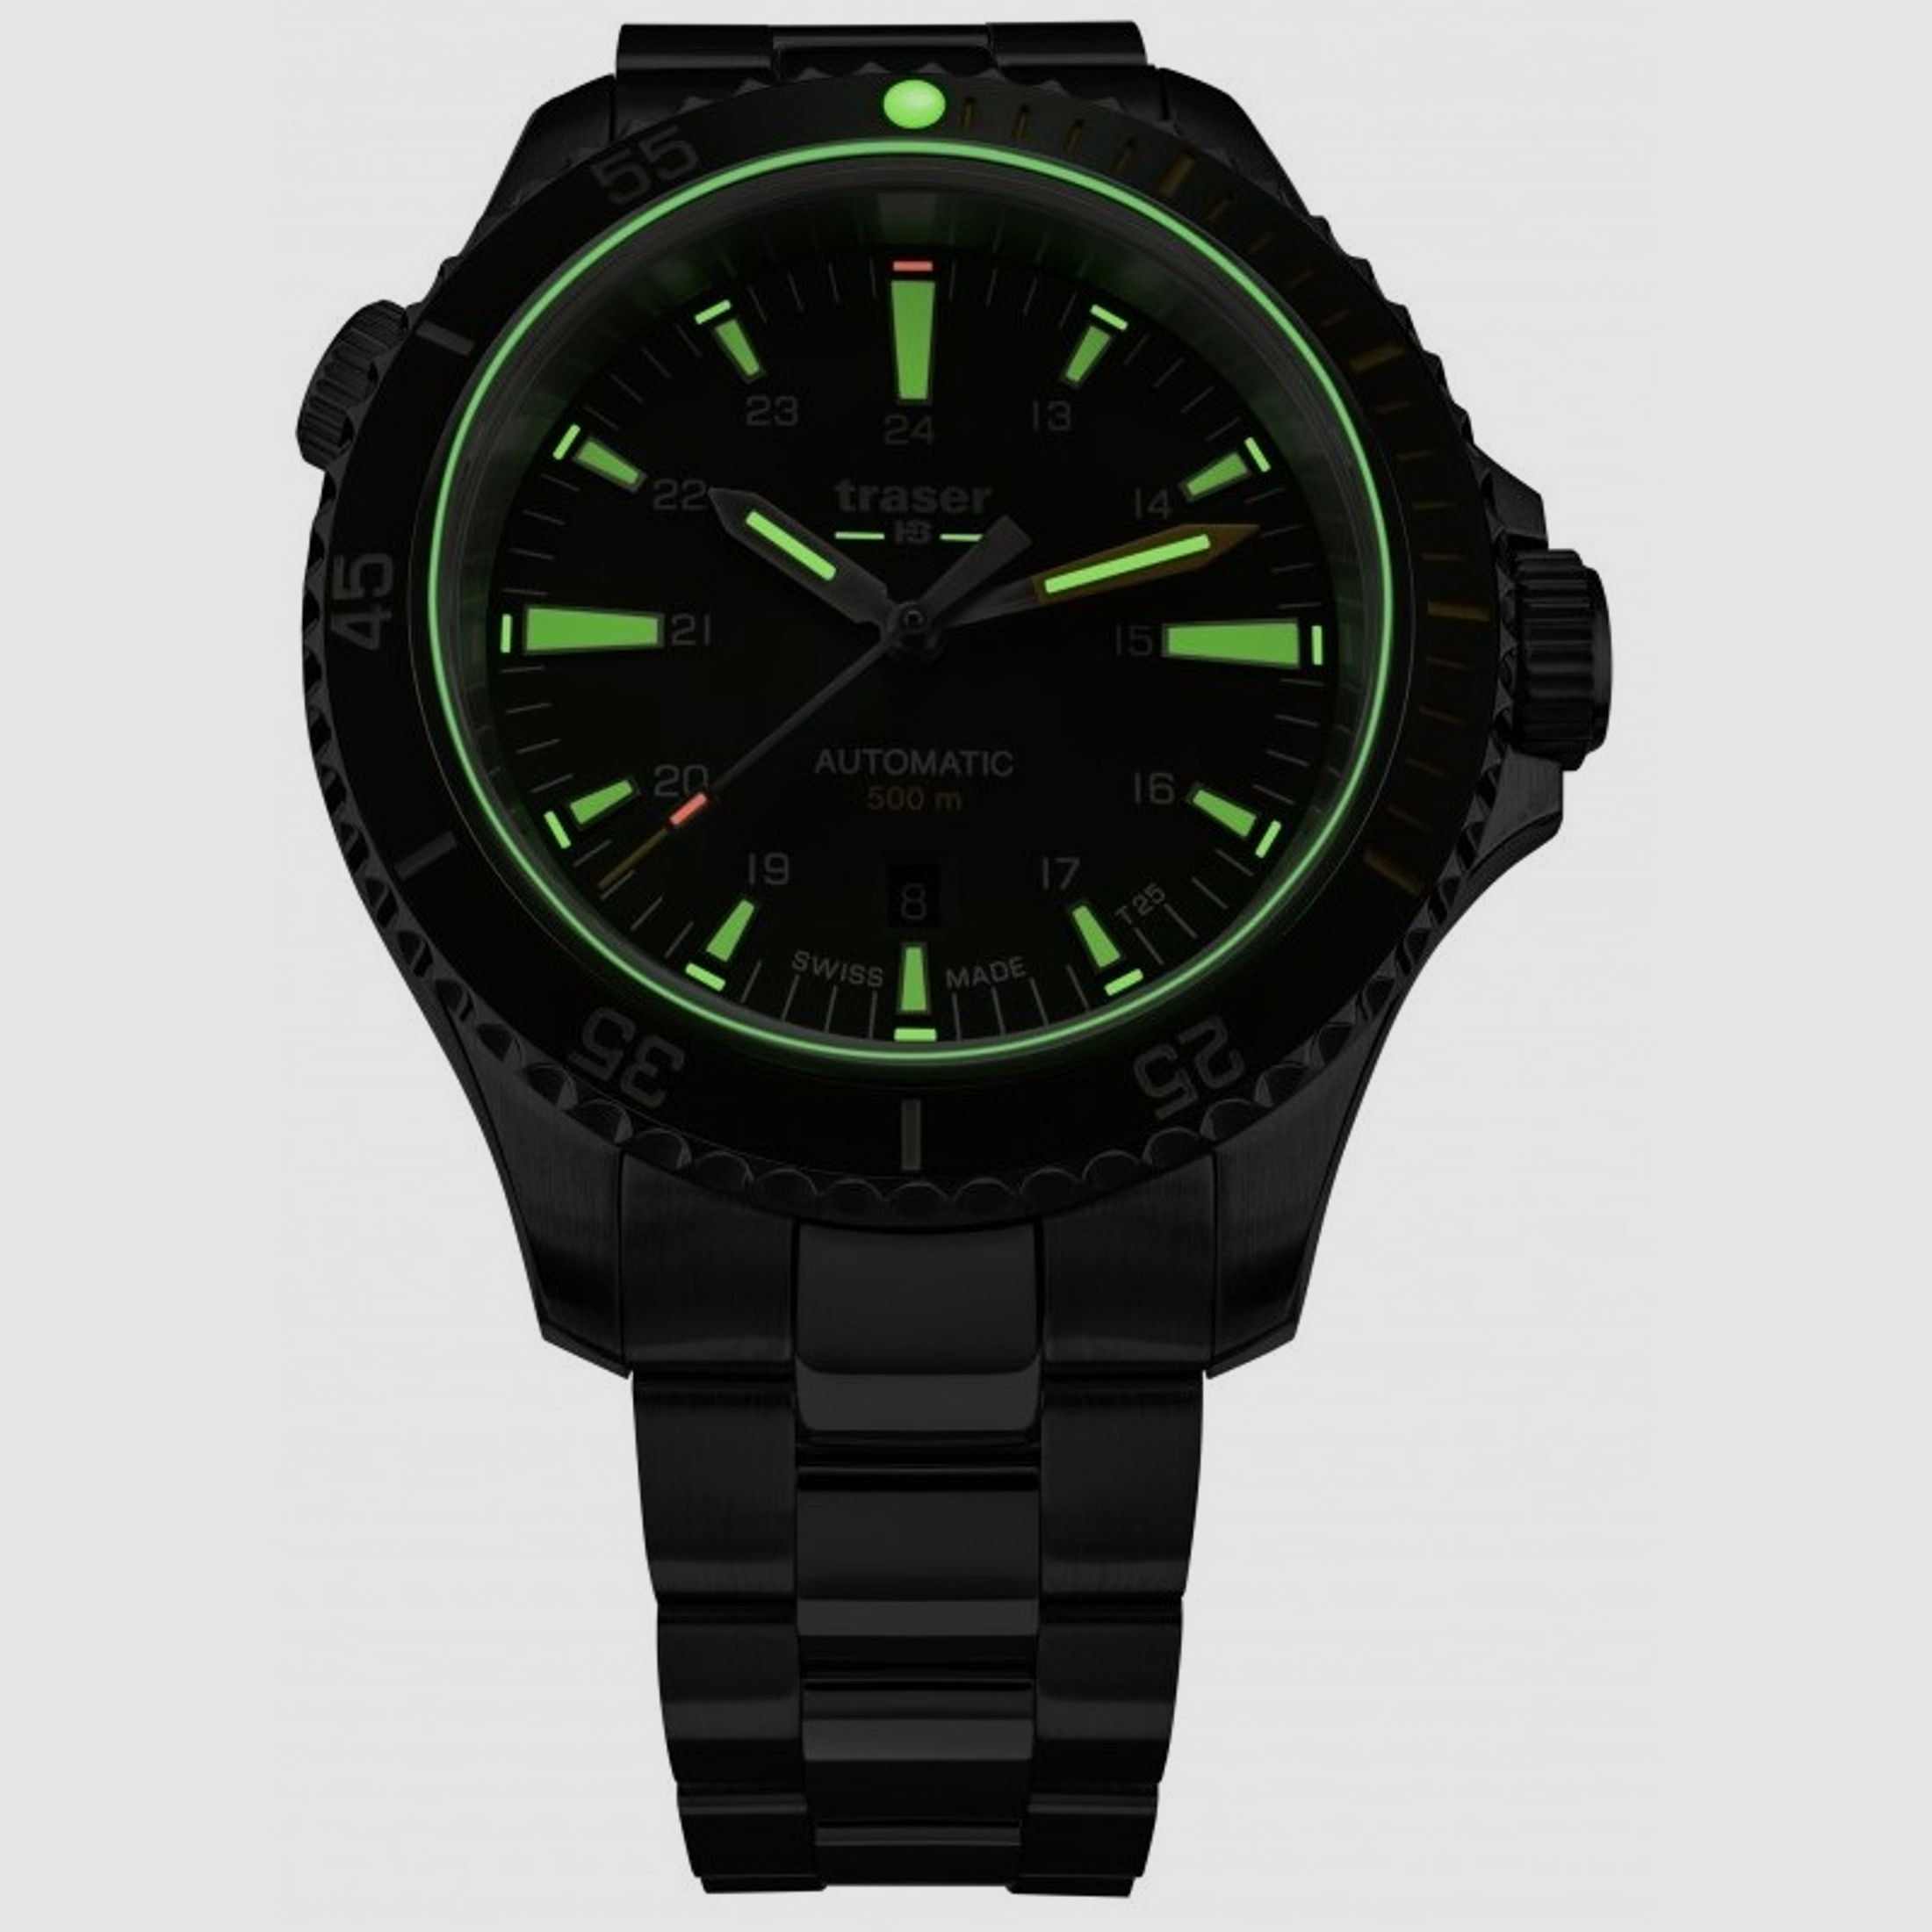 Traser H3 P67 Diver Automatic Green, Special Set